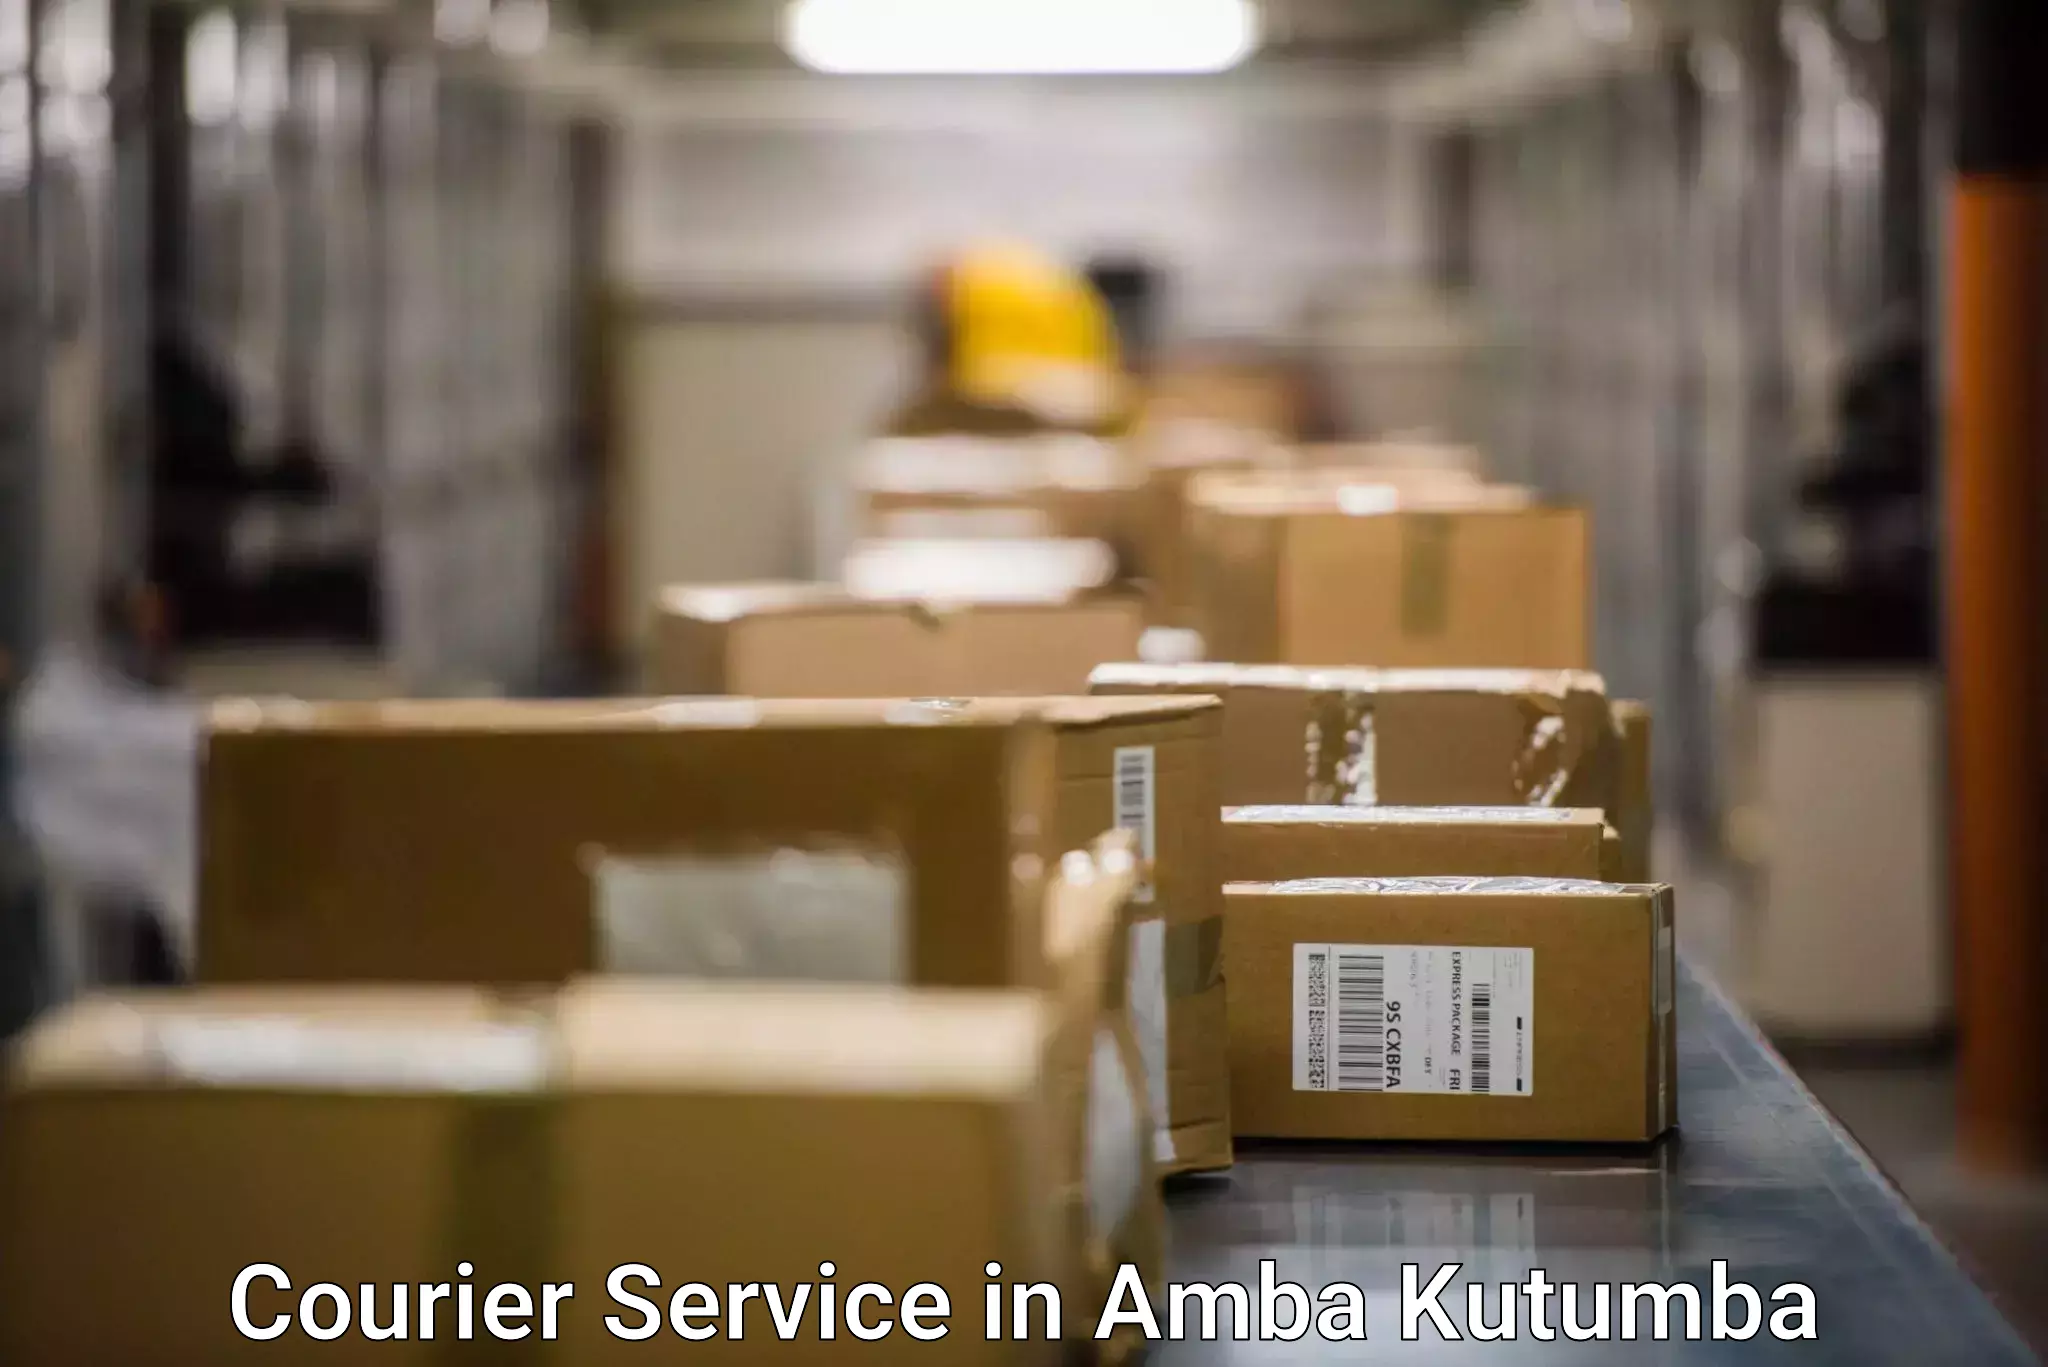 Reliable freight solutions in Amba Kutumba